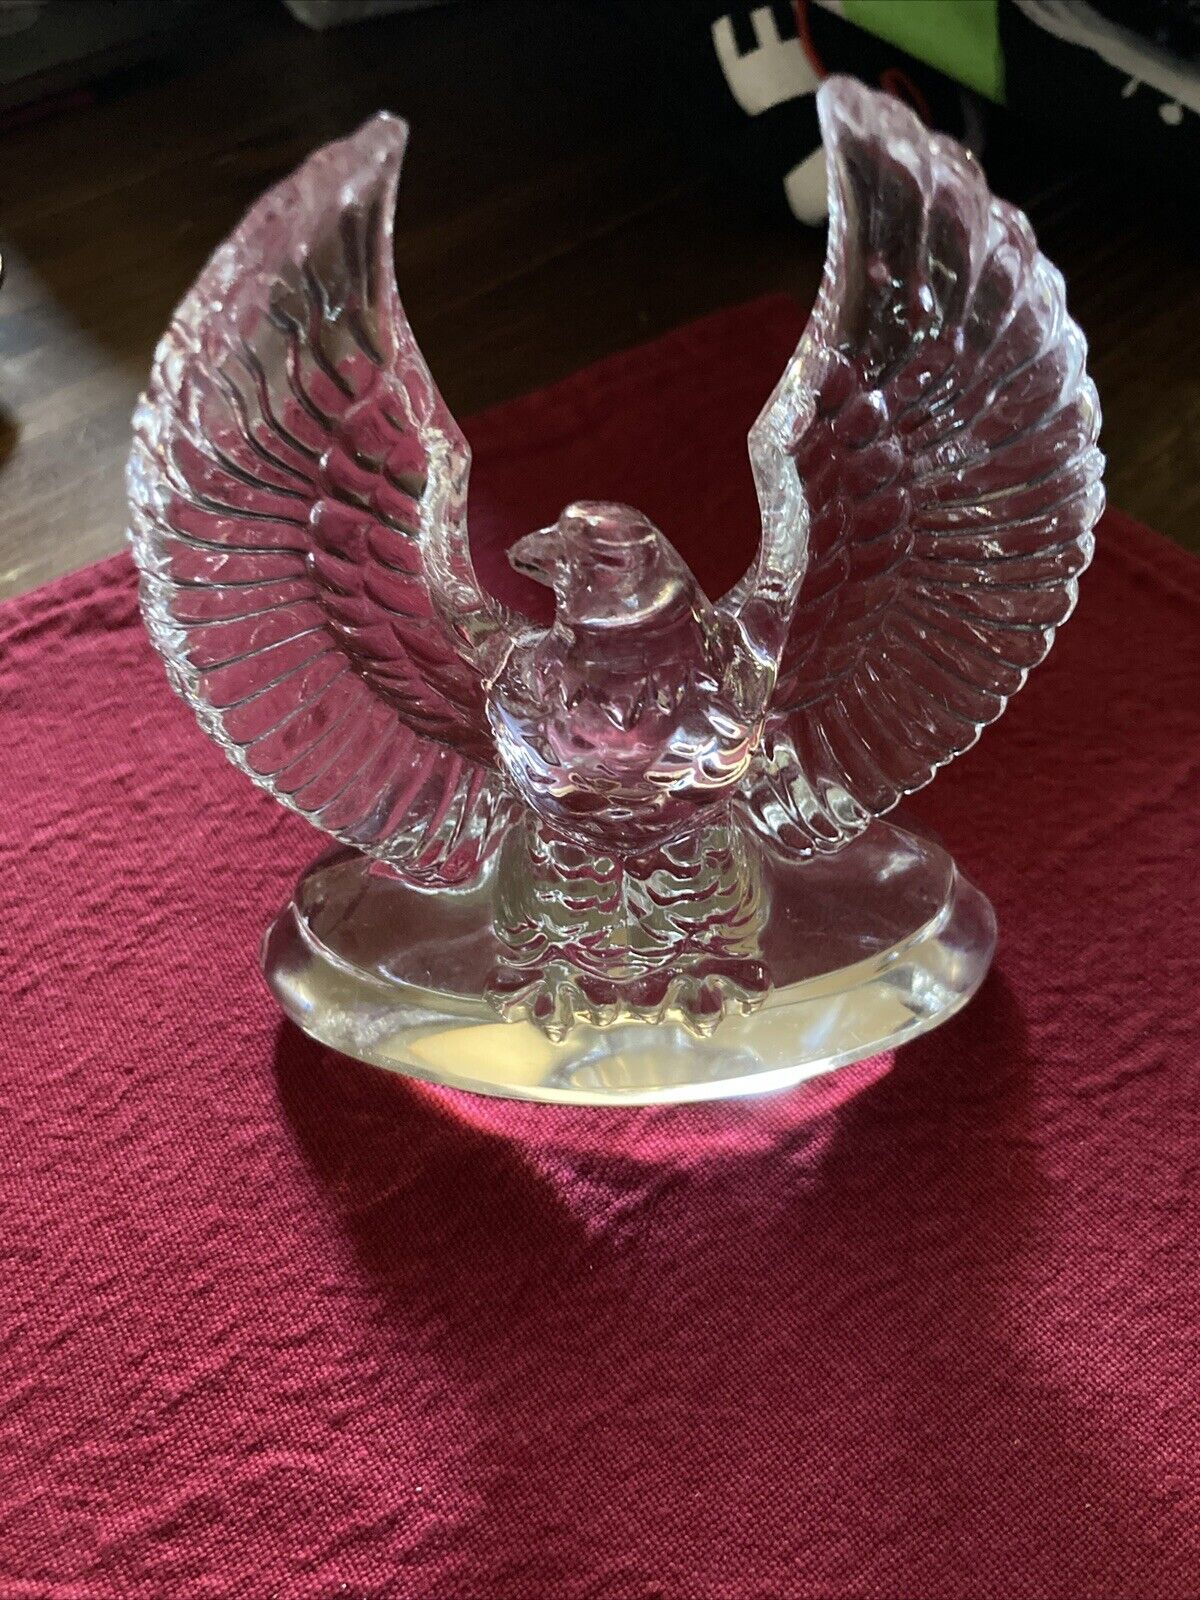 Vintage Stolzle Bald Eagle of Power Crystal Figurine Paperweight